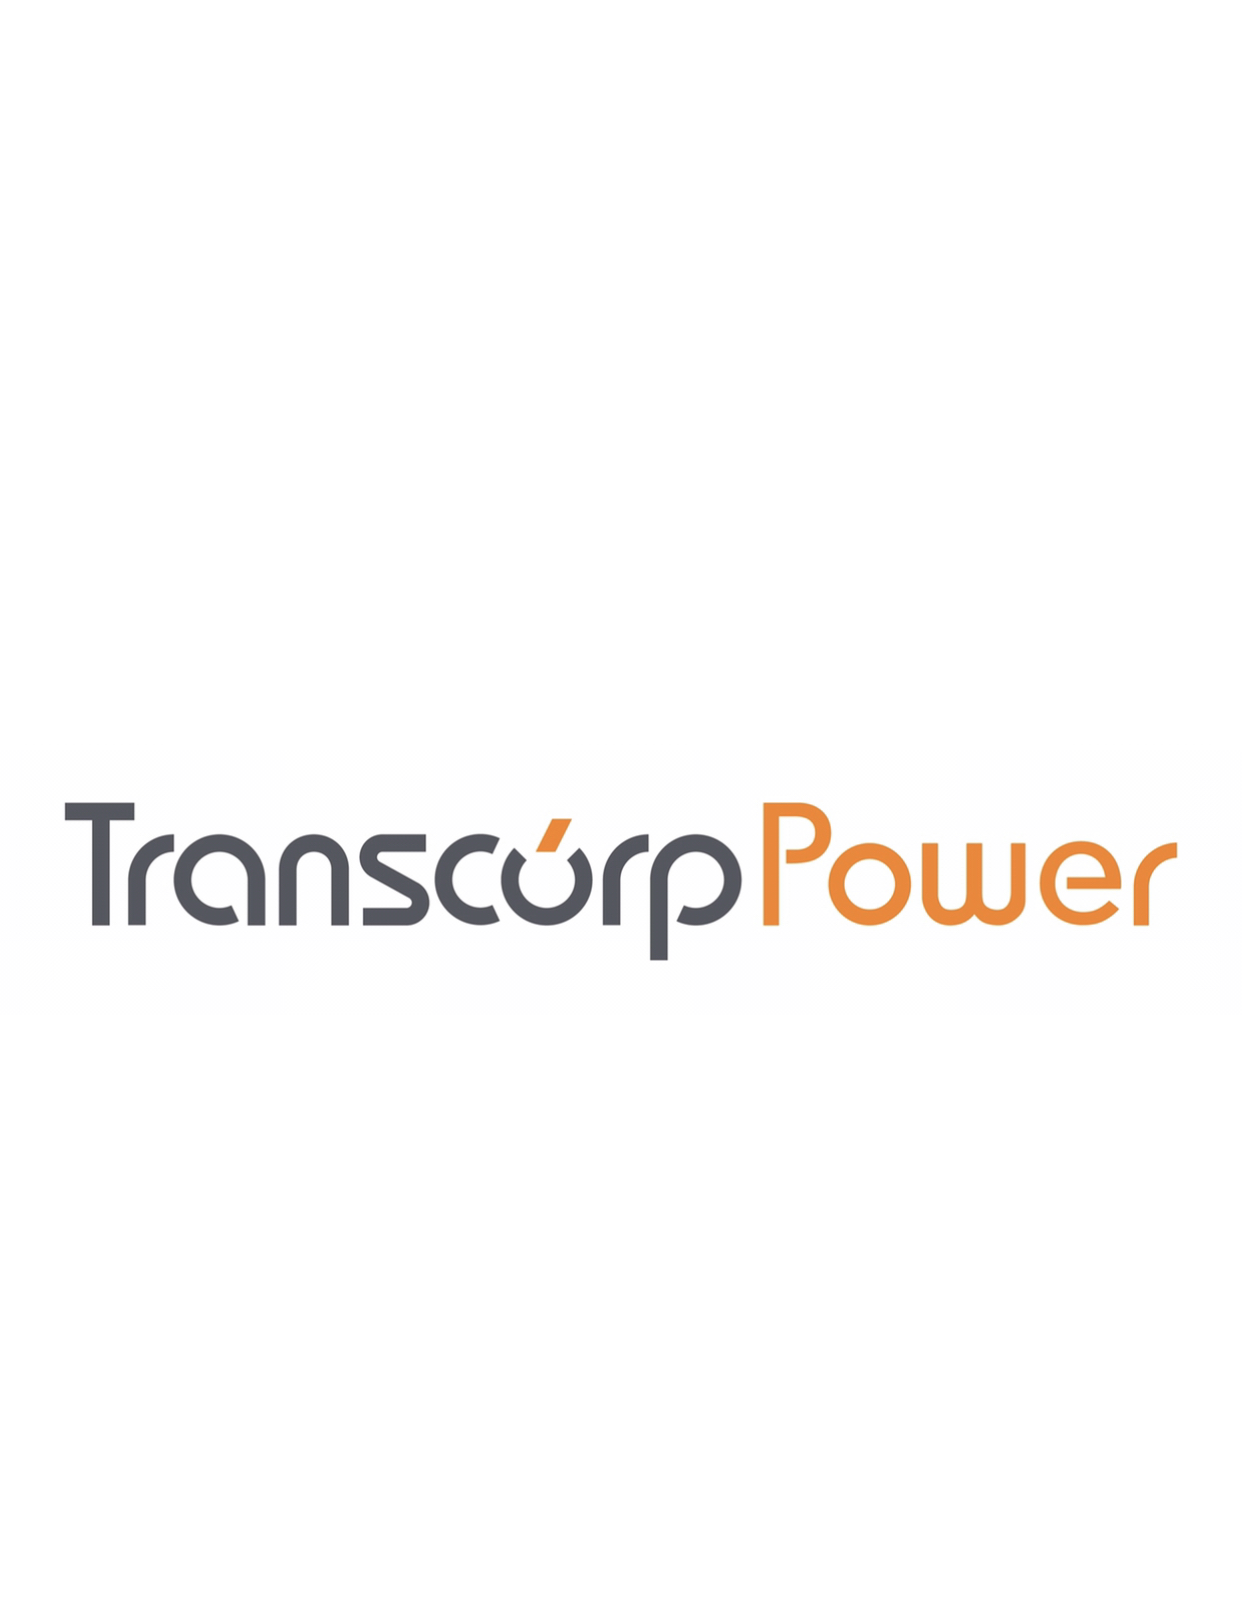 Transcorp Power Grows Profit By 75% - Declares Dividend Of N3.13